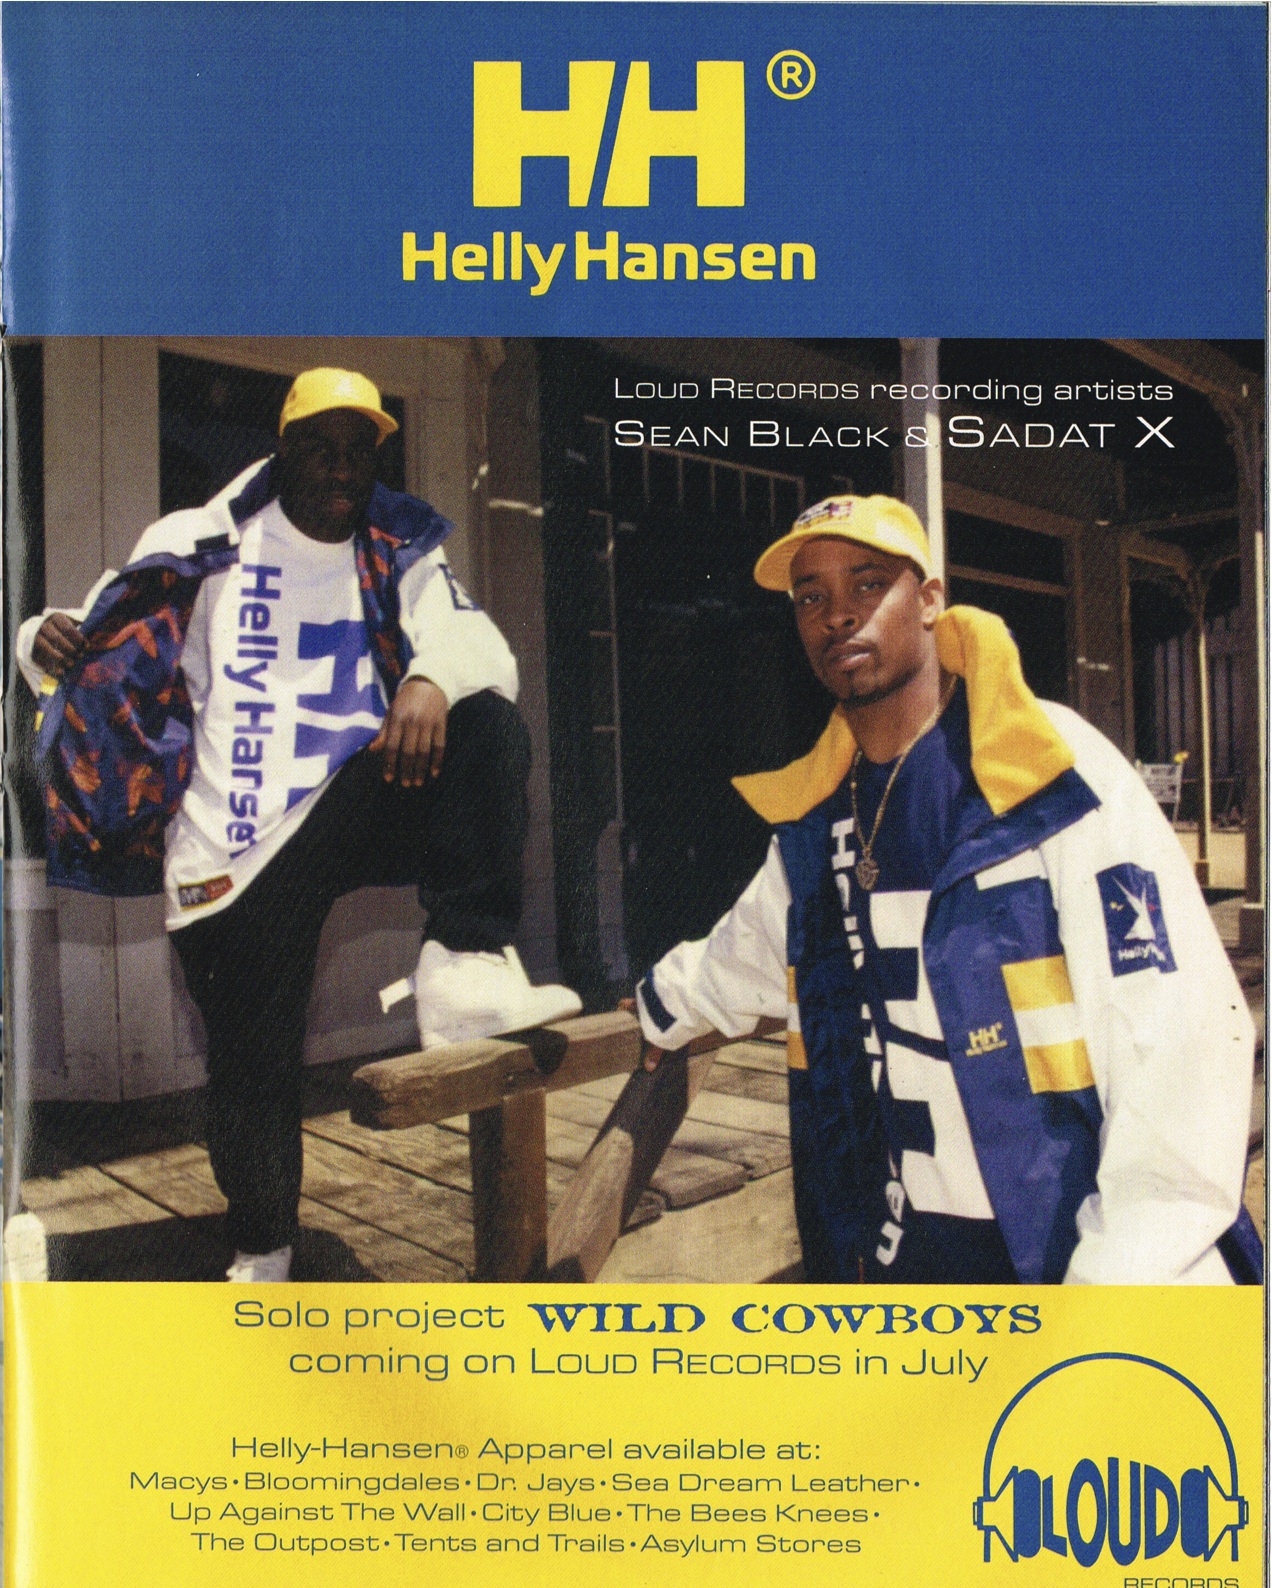 HELLY HANSEN and HIPHOP